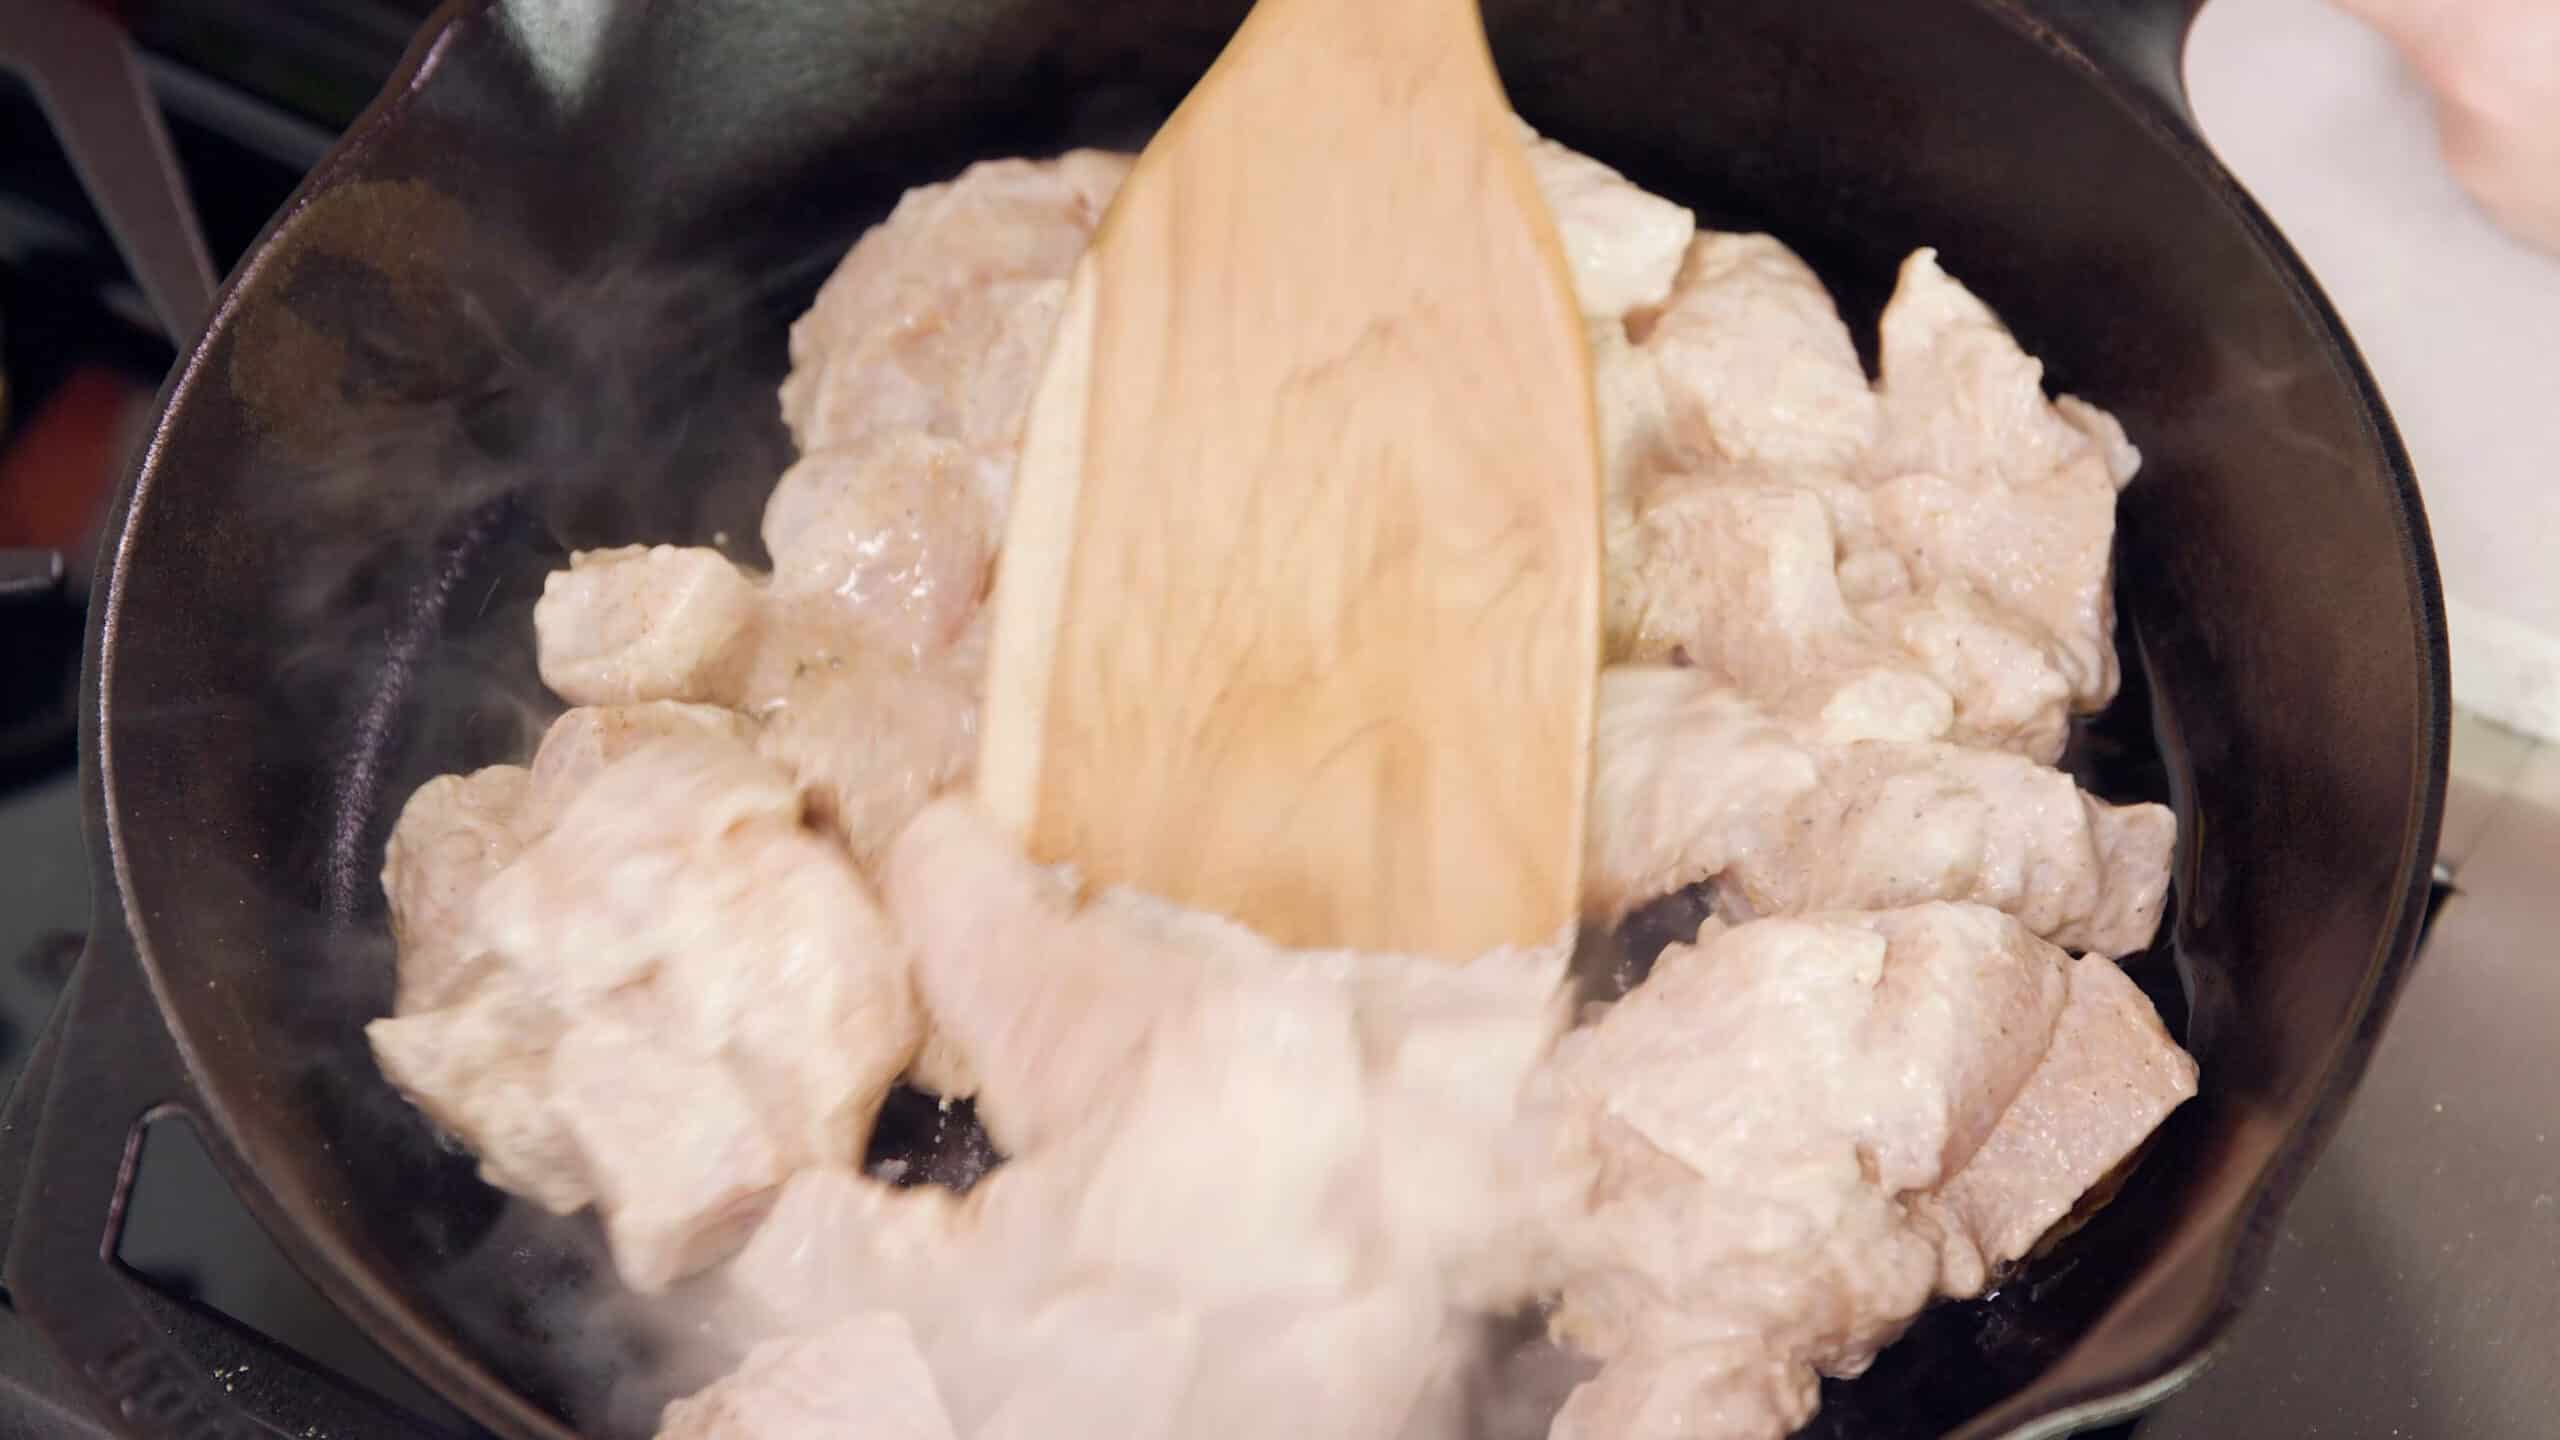 Overhead view of a cast iron skillet filled with sizzling bites of chicken with a wood spatula stirring.